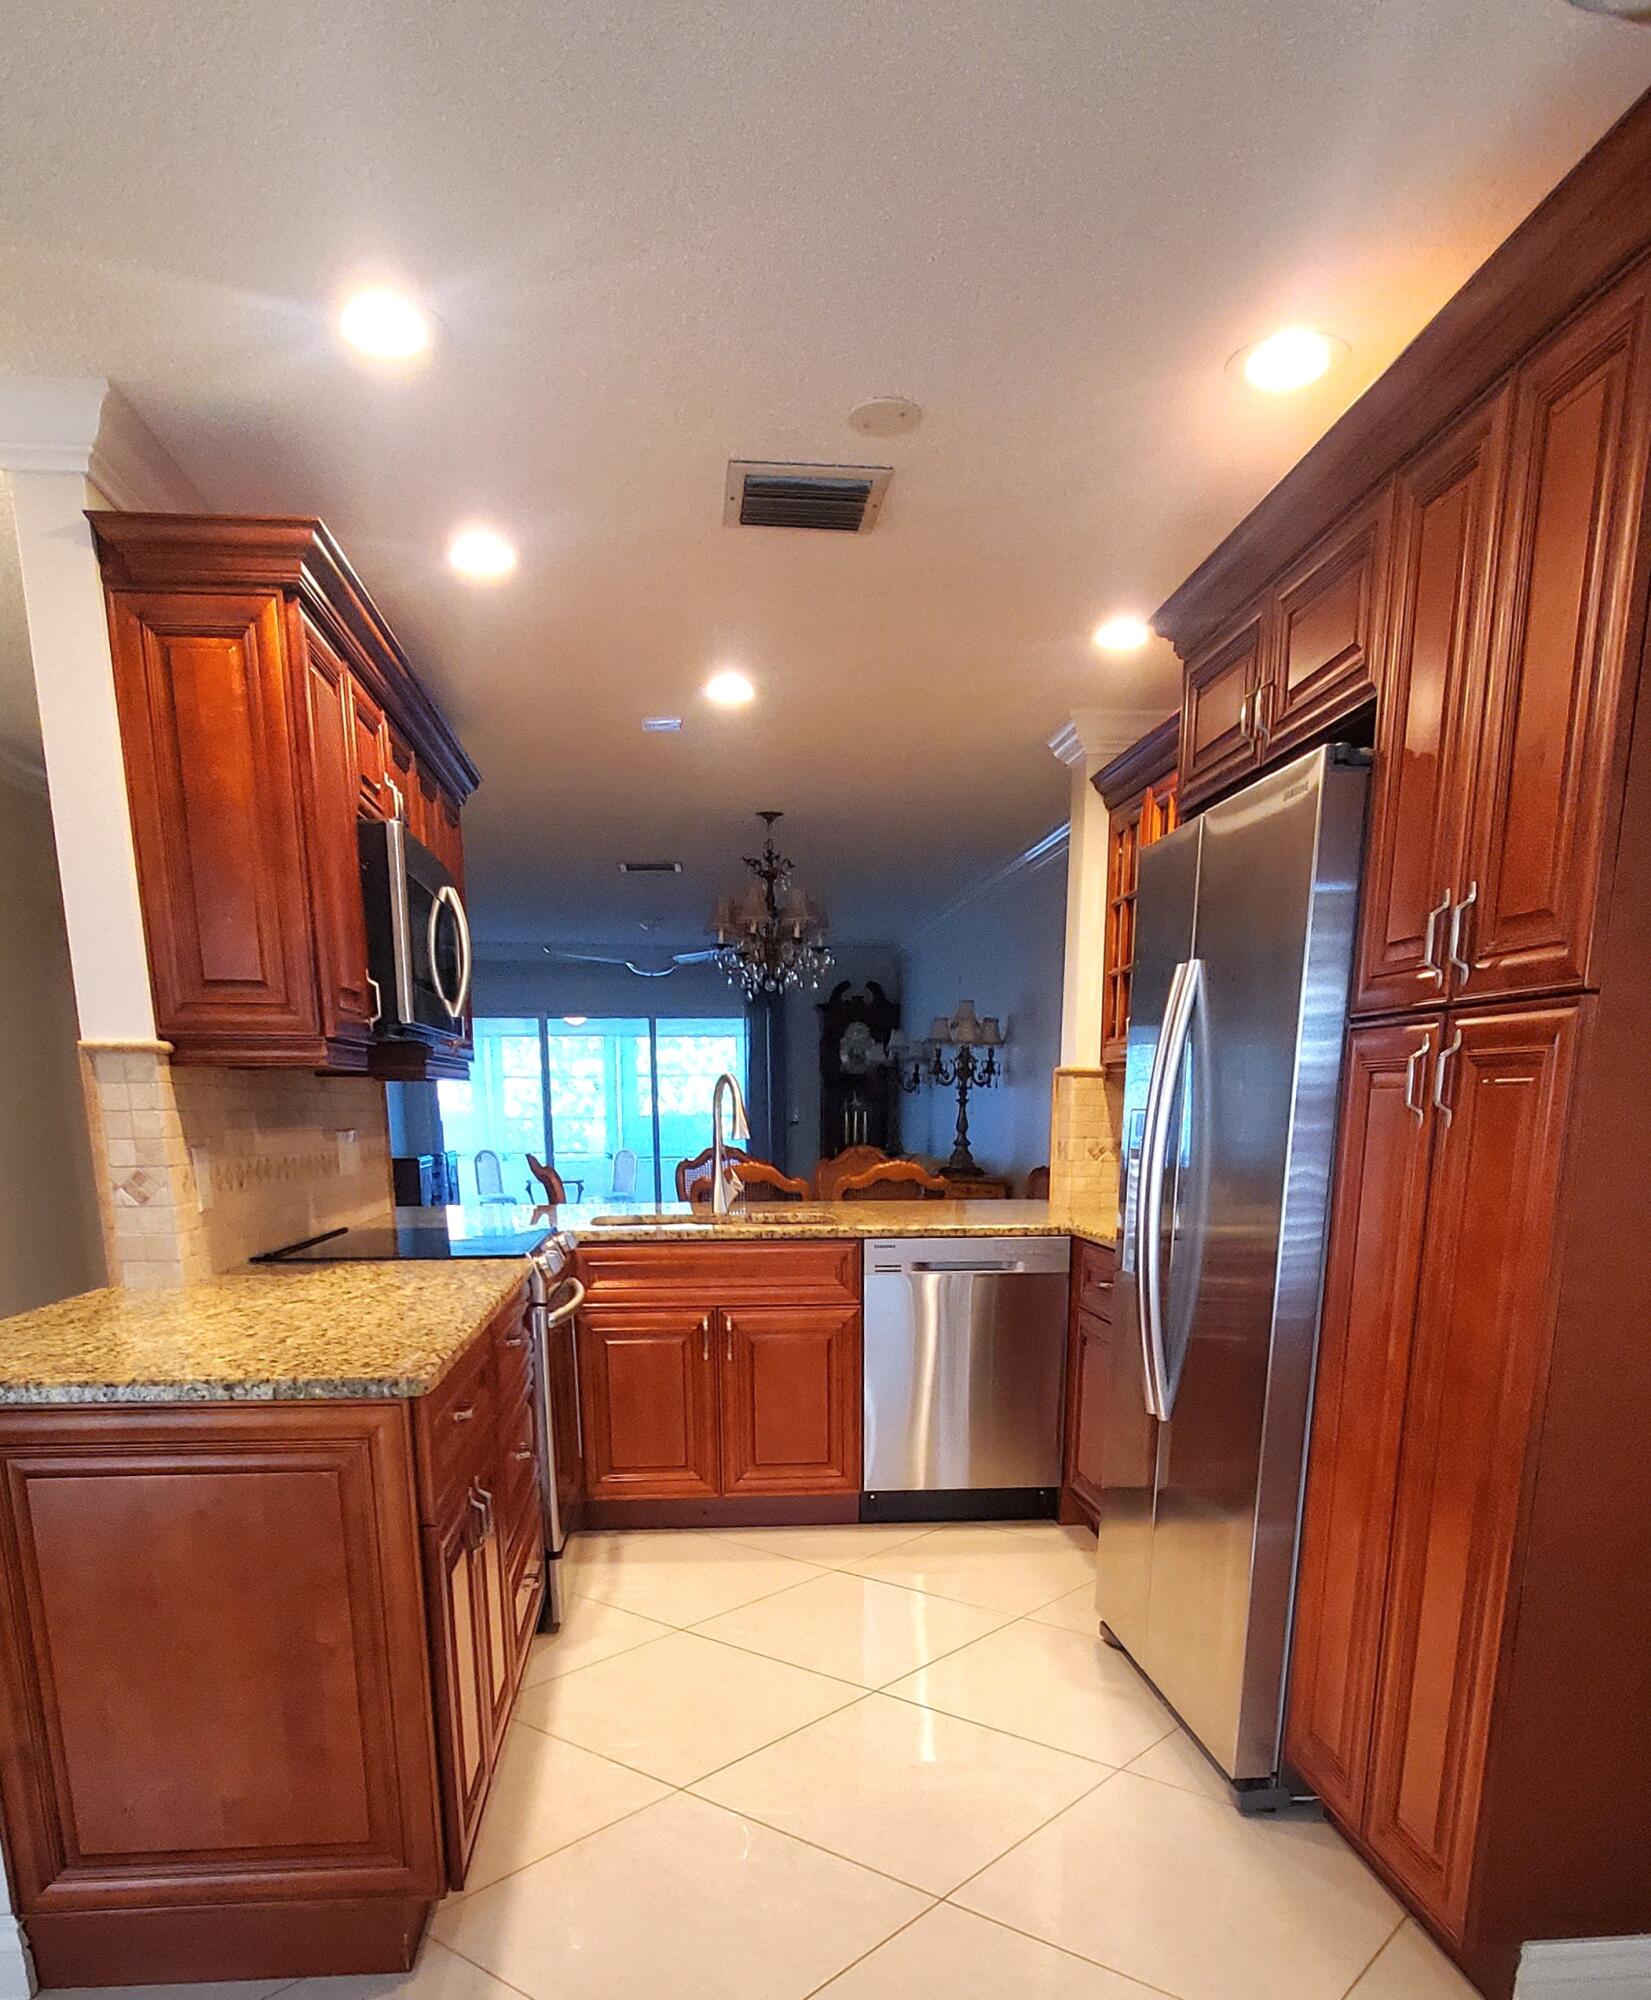 a kitchen with stainless steel appliances granite countertop a refrigerator a sink dishwasher and wooden cabinets